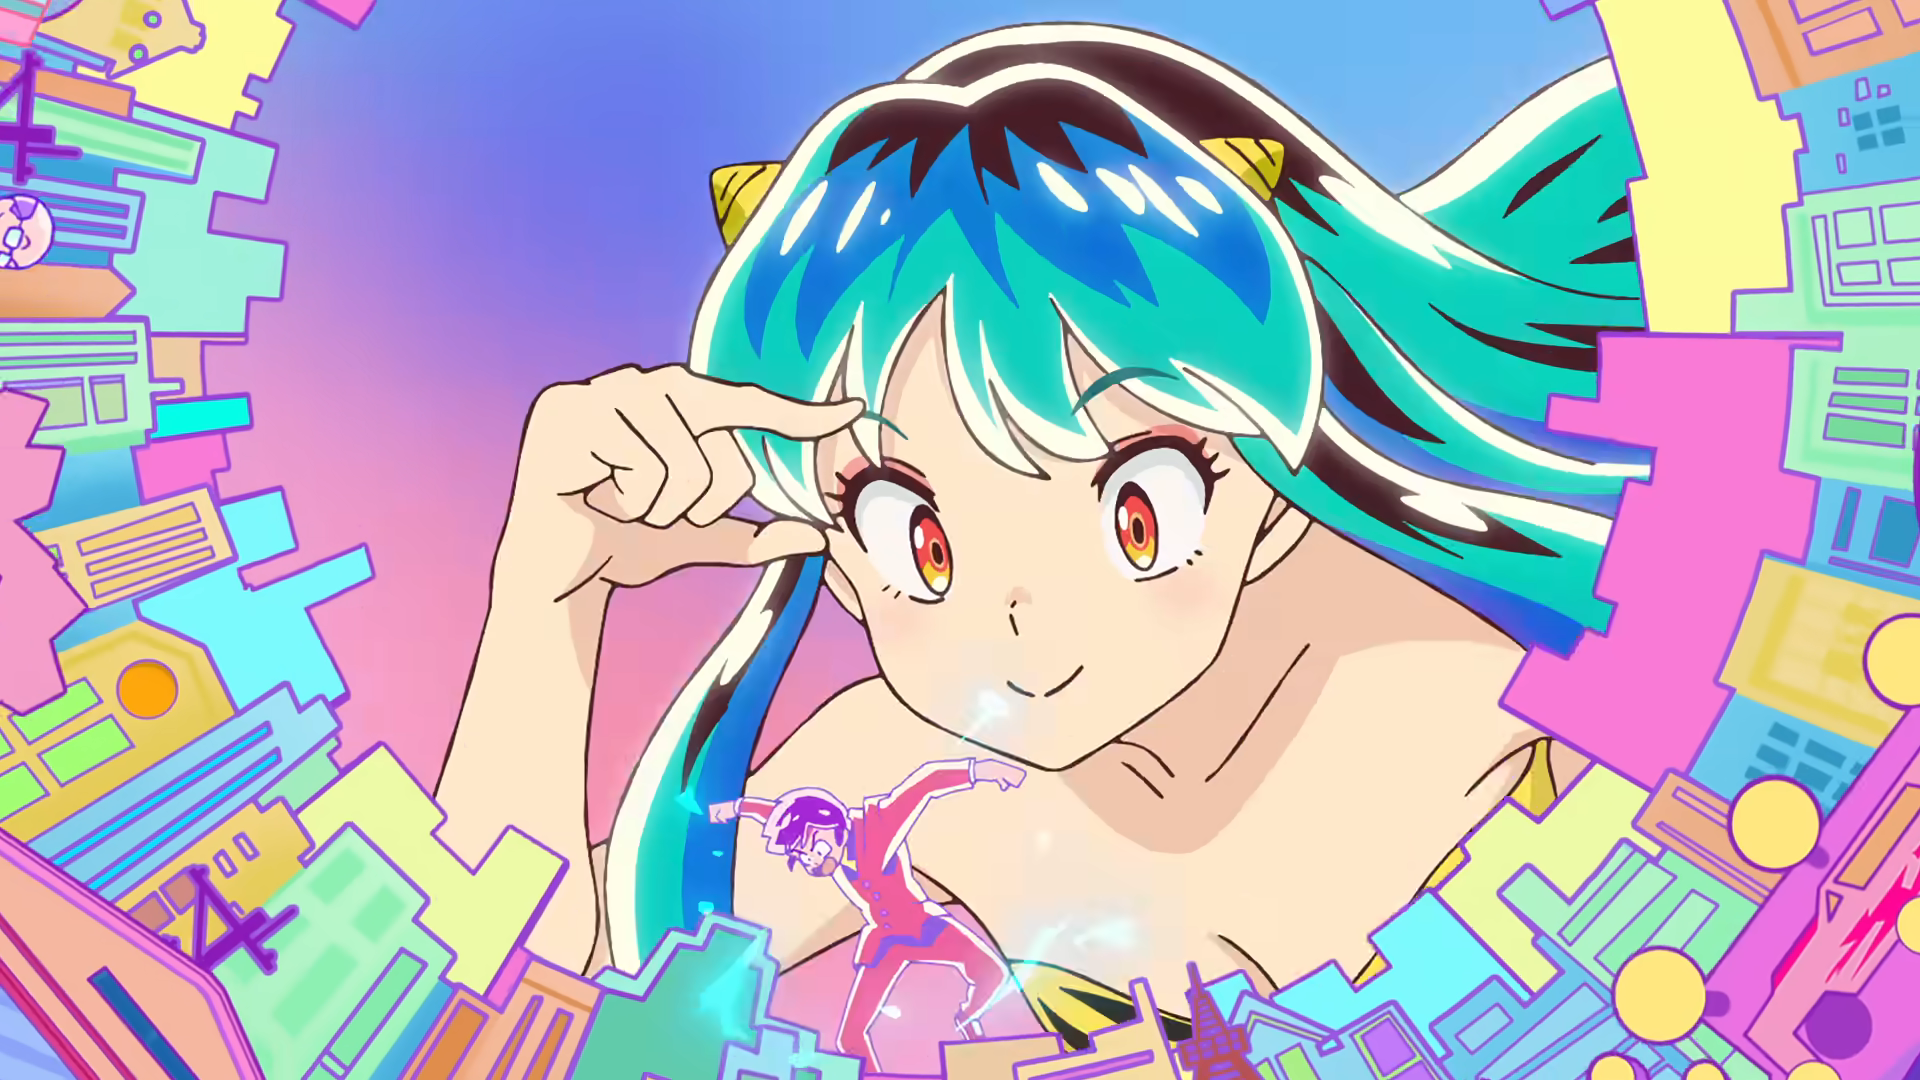 Urusei Yatsura episode 11 release date where to watch what to expect and  more